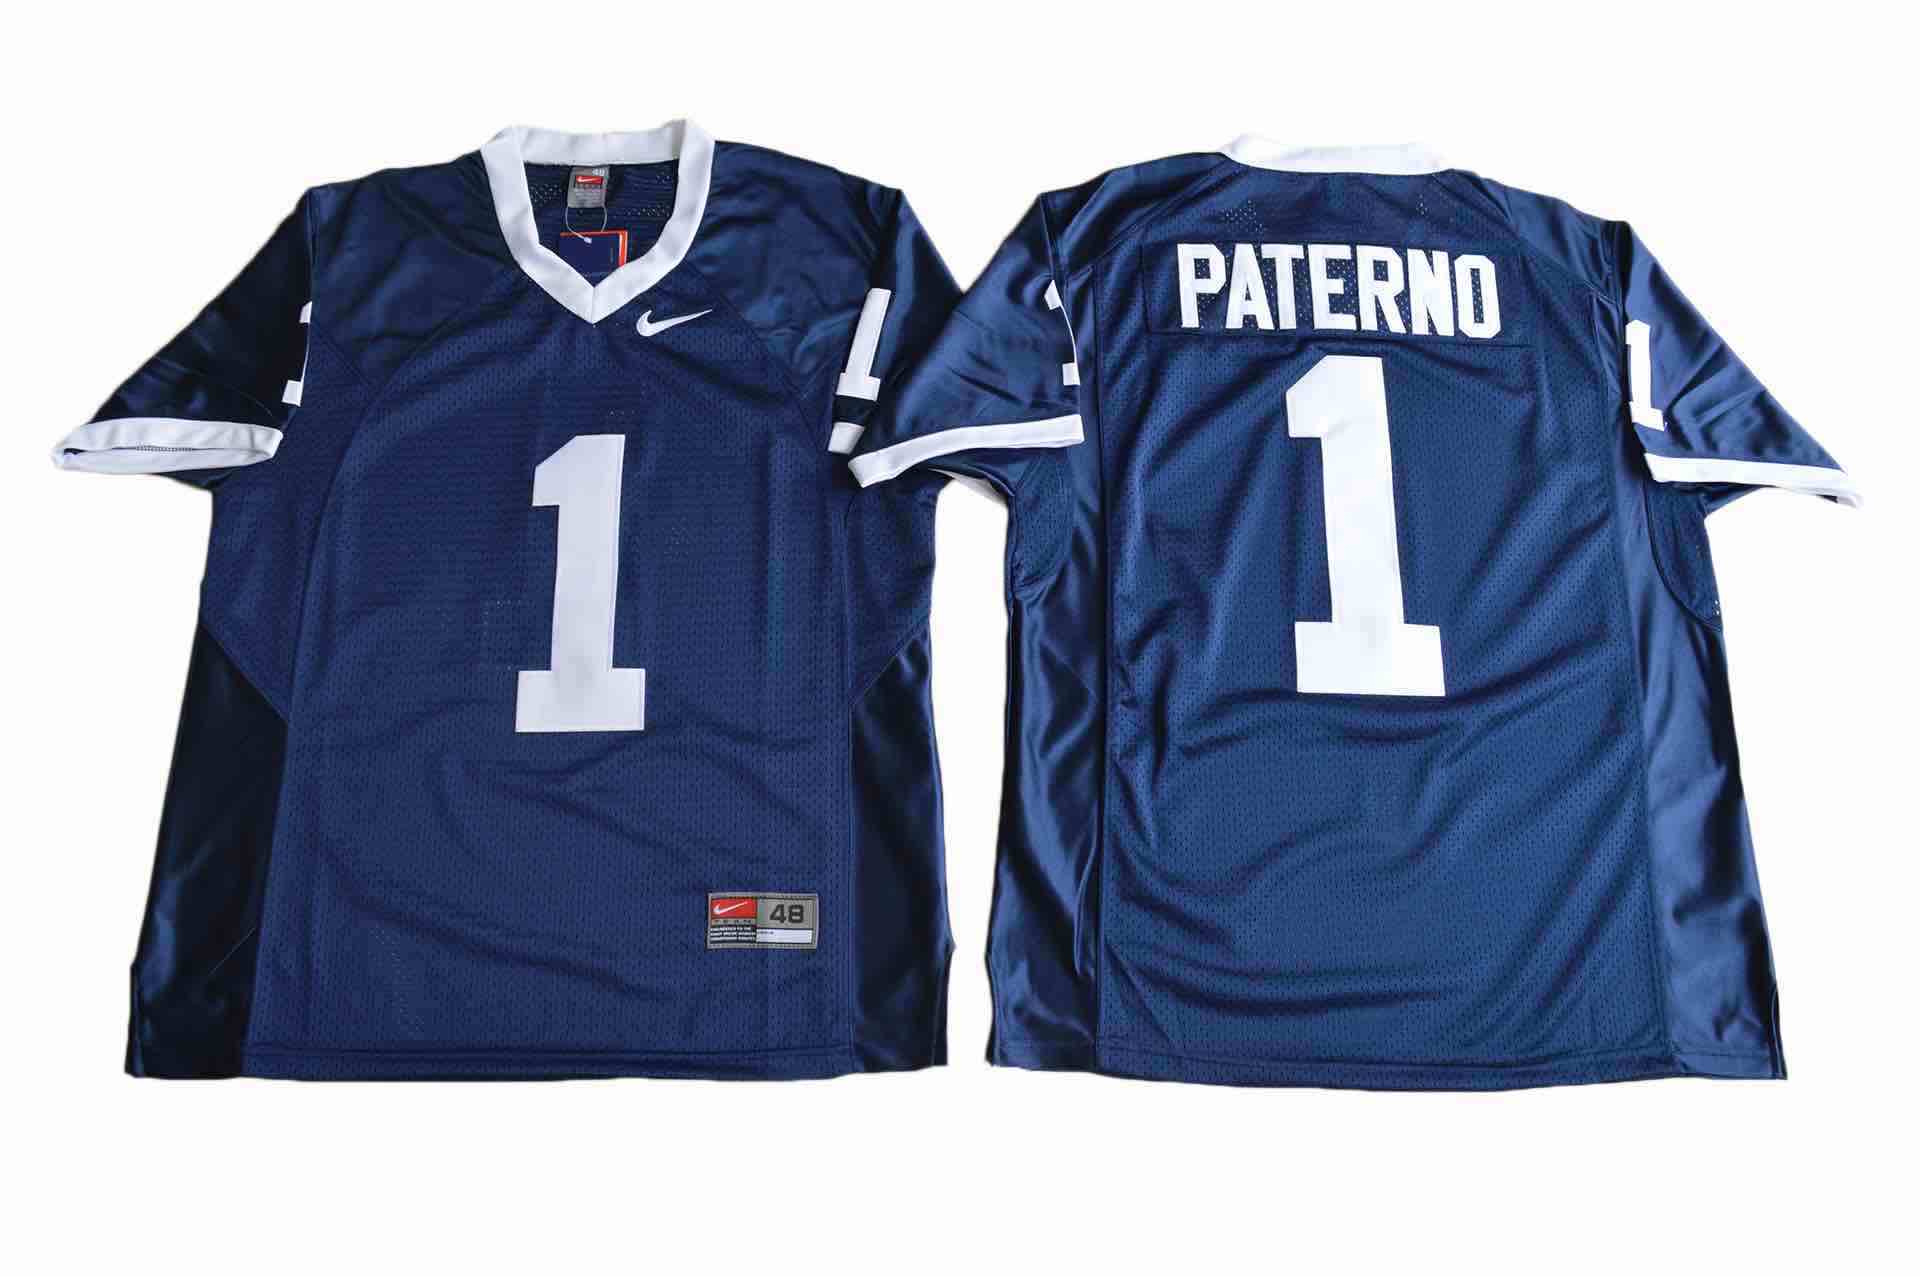 Penn State Nittany Lions Joe Paterno 1 College Football Jersey - Navy Blue